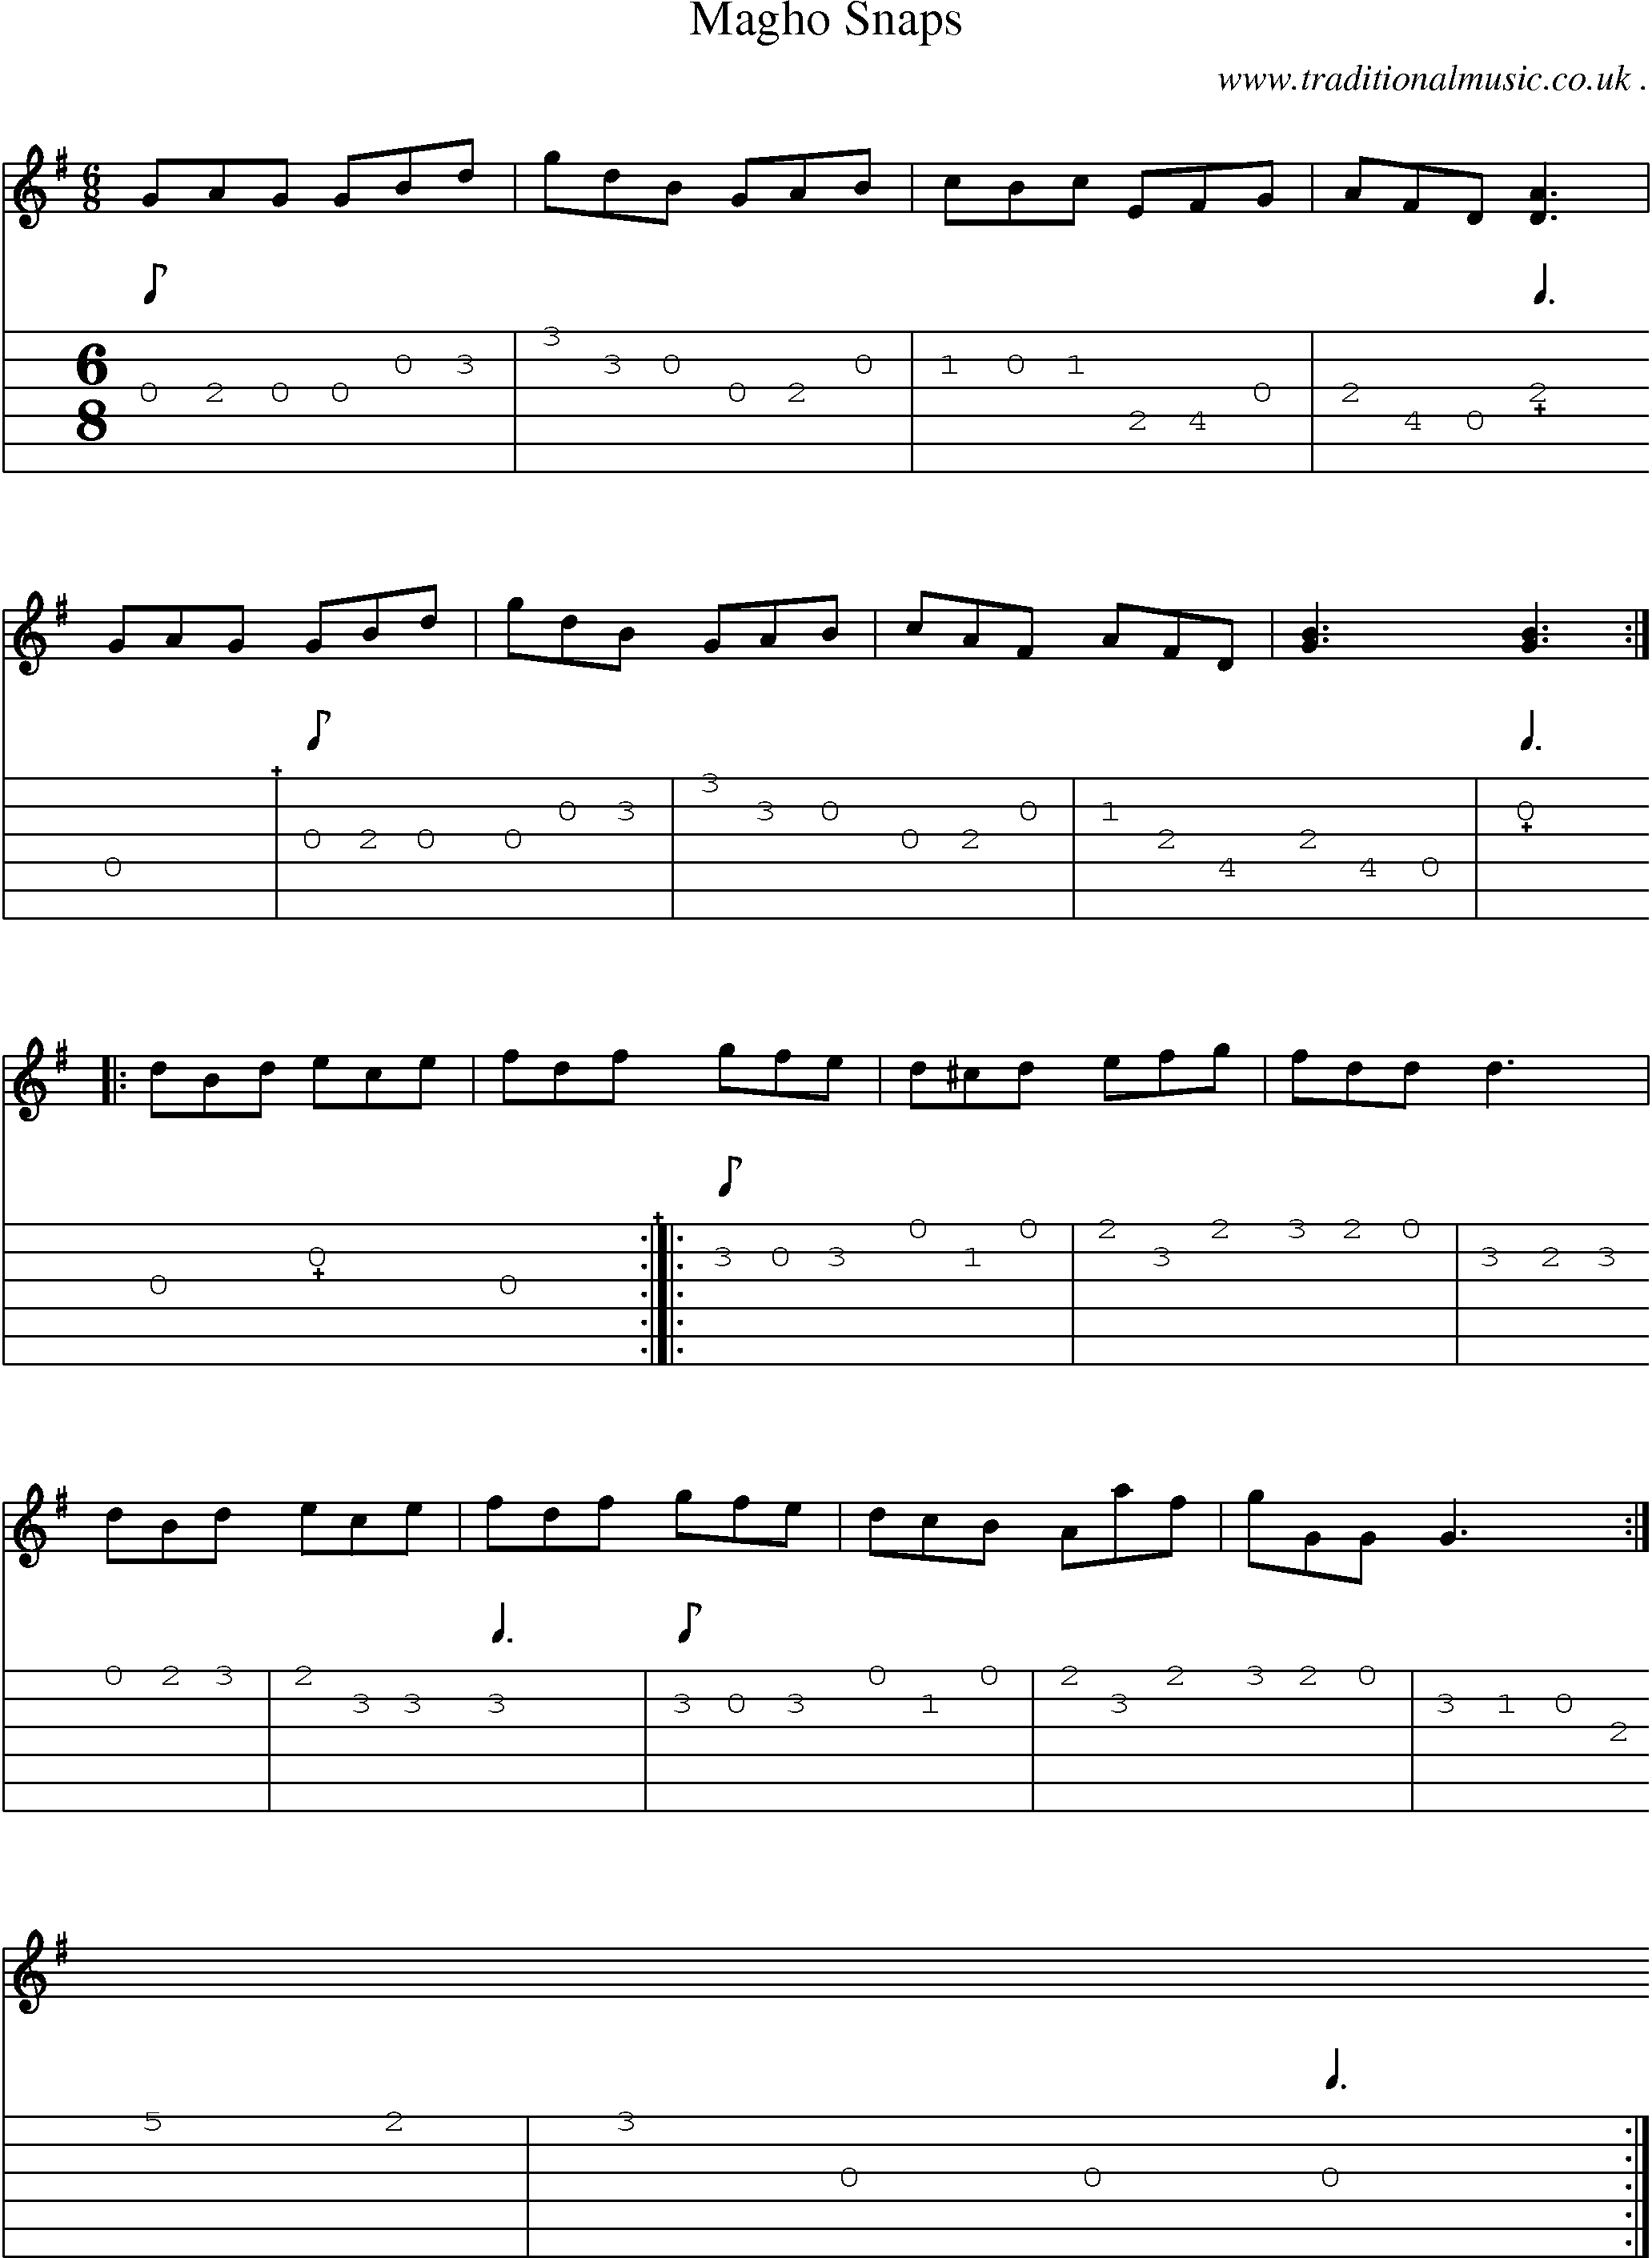 Sheet-Music and Guitar Tabs for Magho Snaps